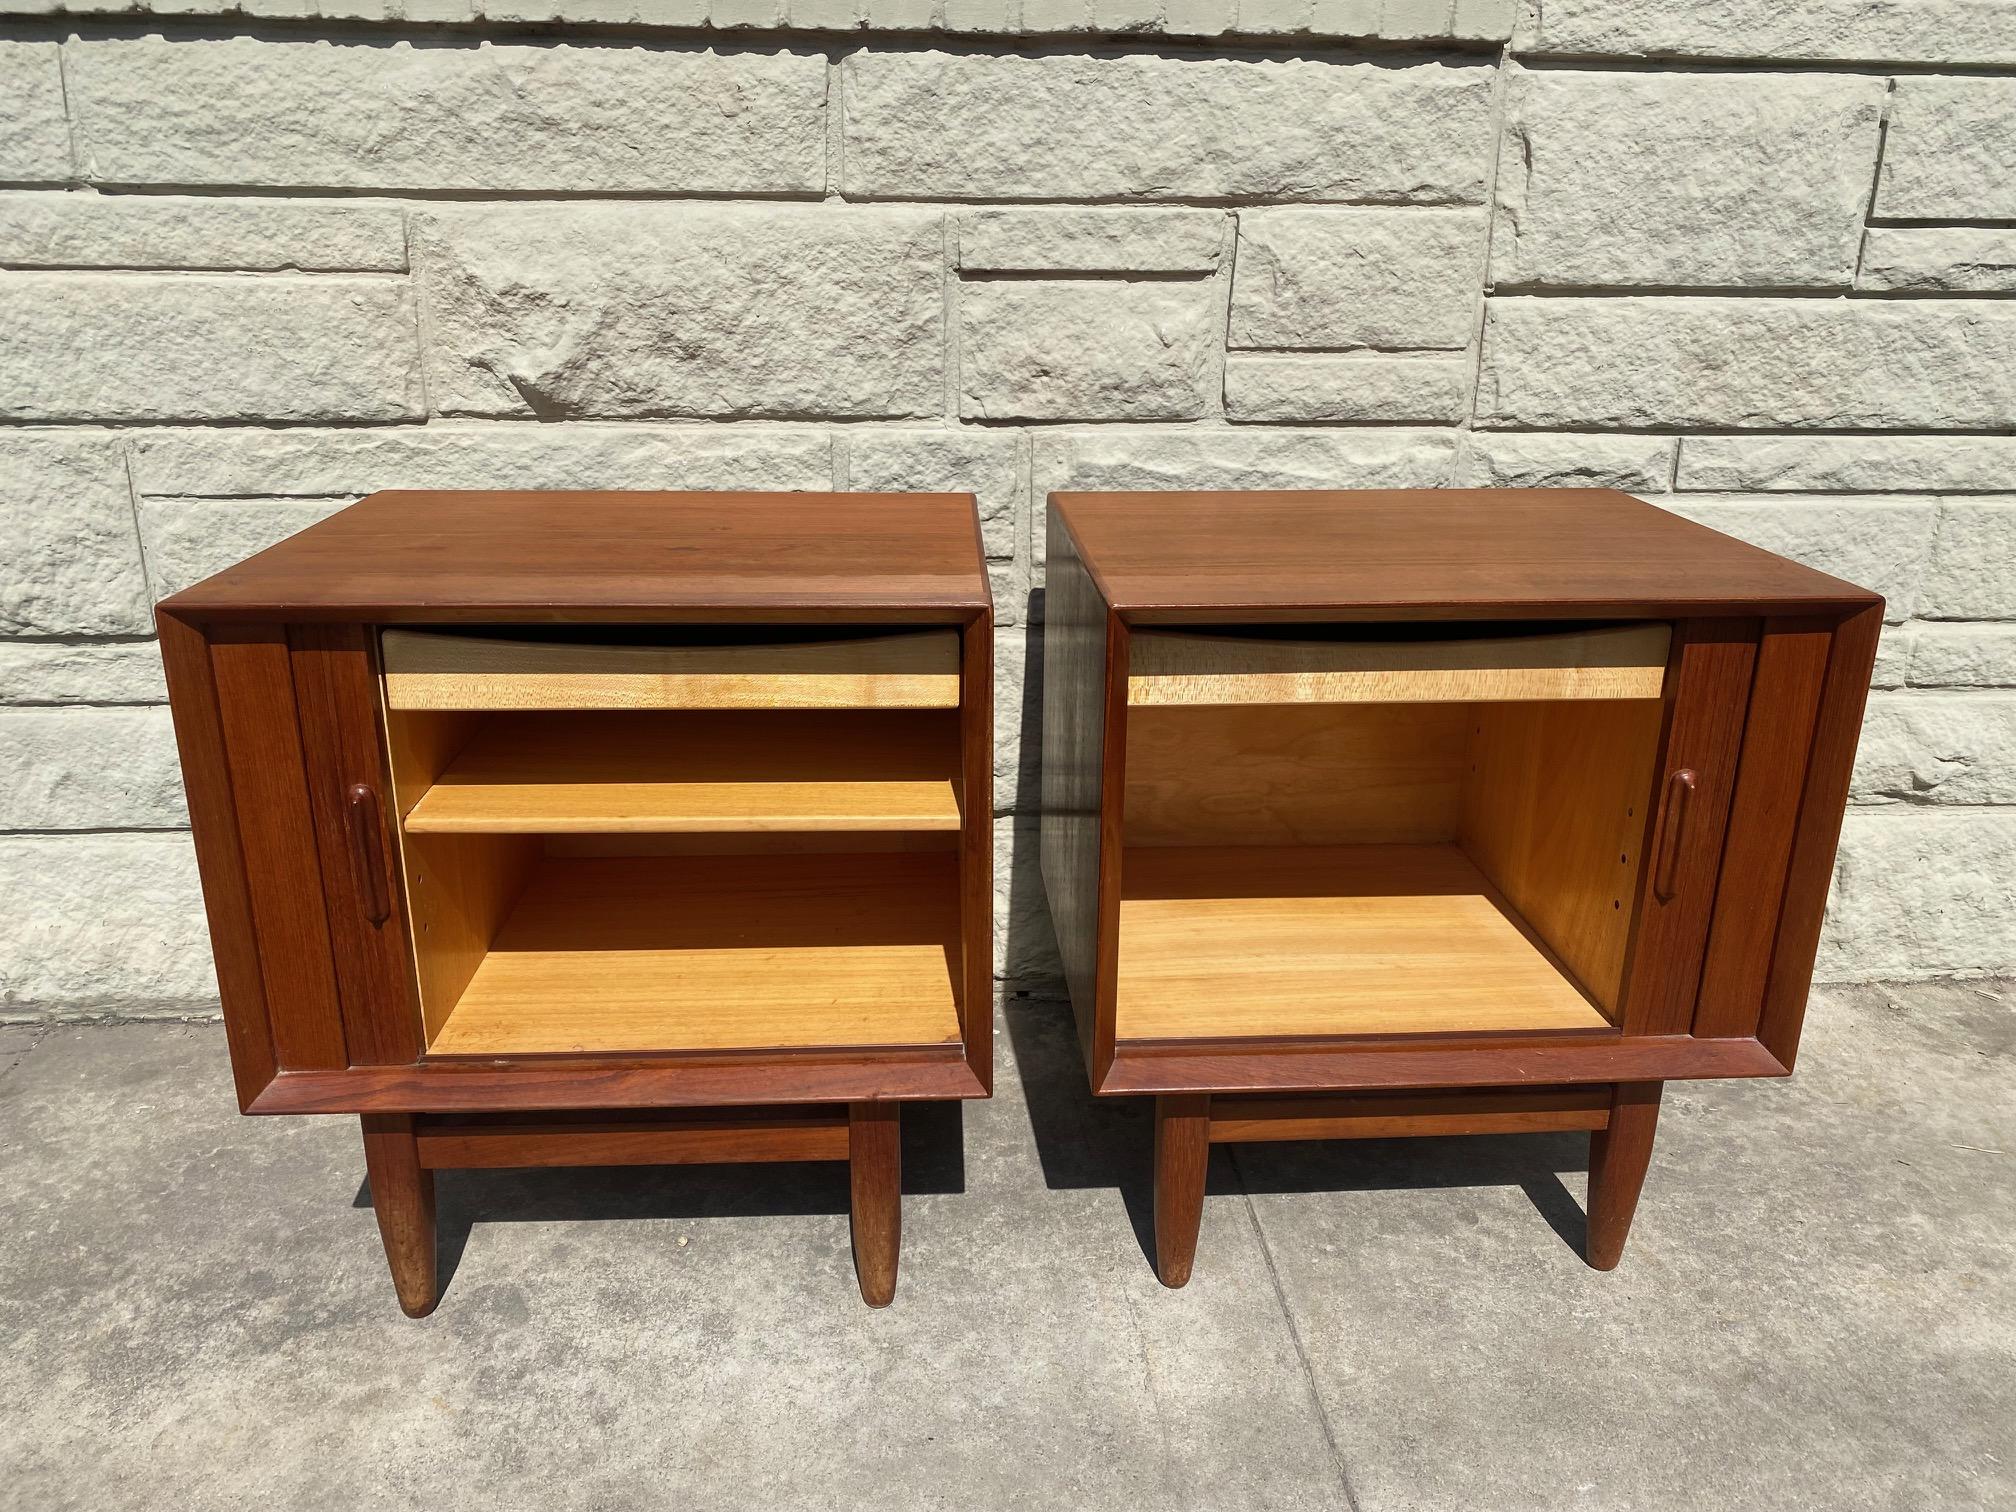 A set of vintage Danish nightstands with tambour doors made by Svend Madsen for Falster open up to plenty of storage with one drawer and an adjustable shelf. This pair of mid-century nightstands are in overall good condition. 

please note one